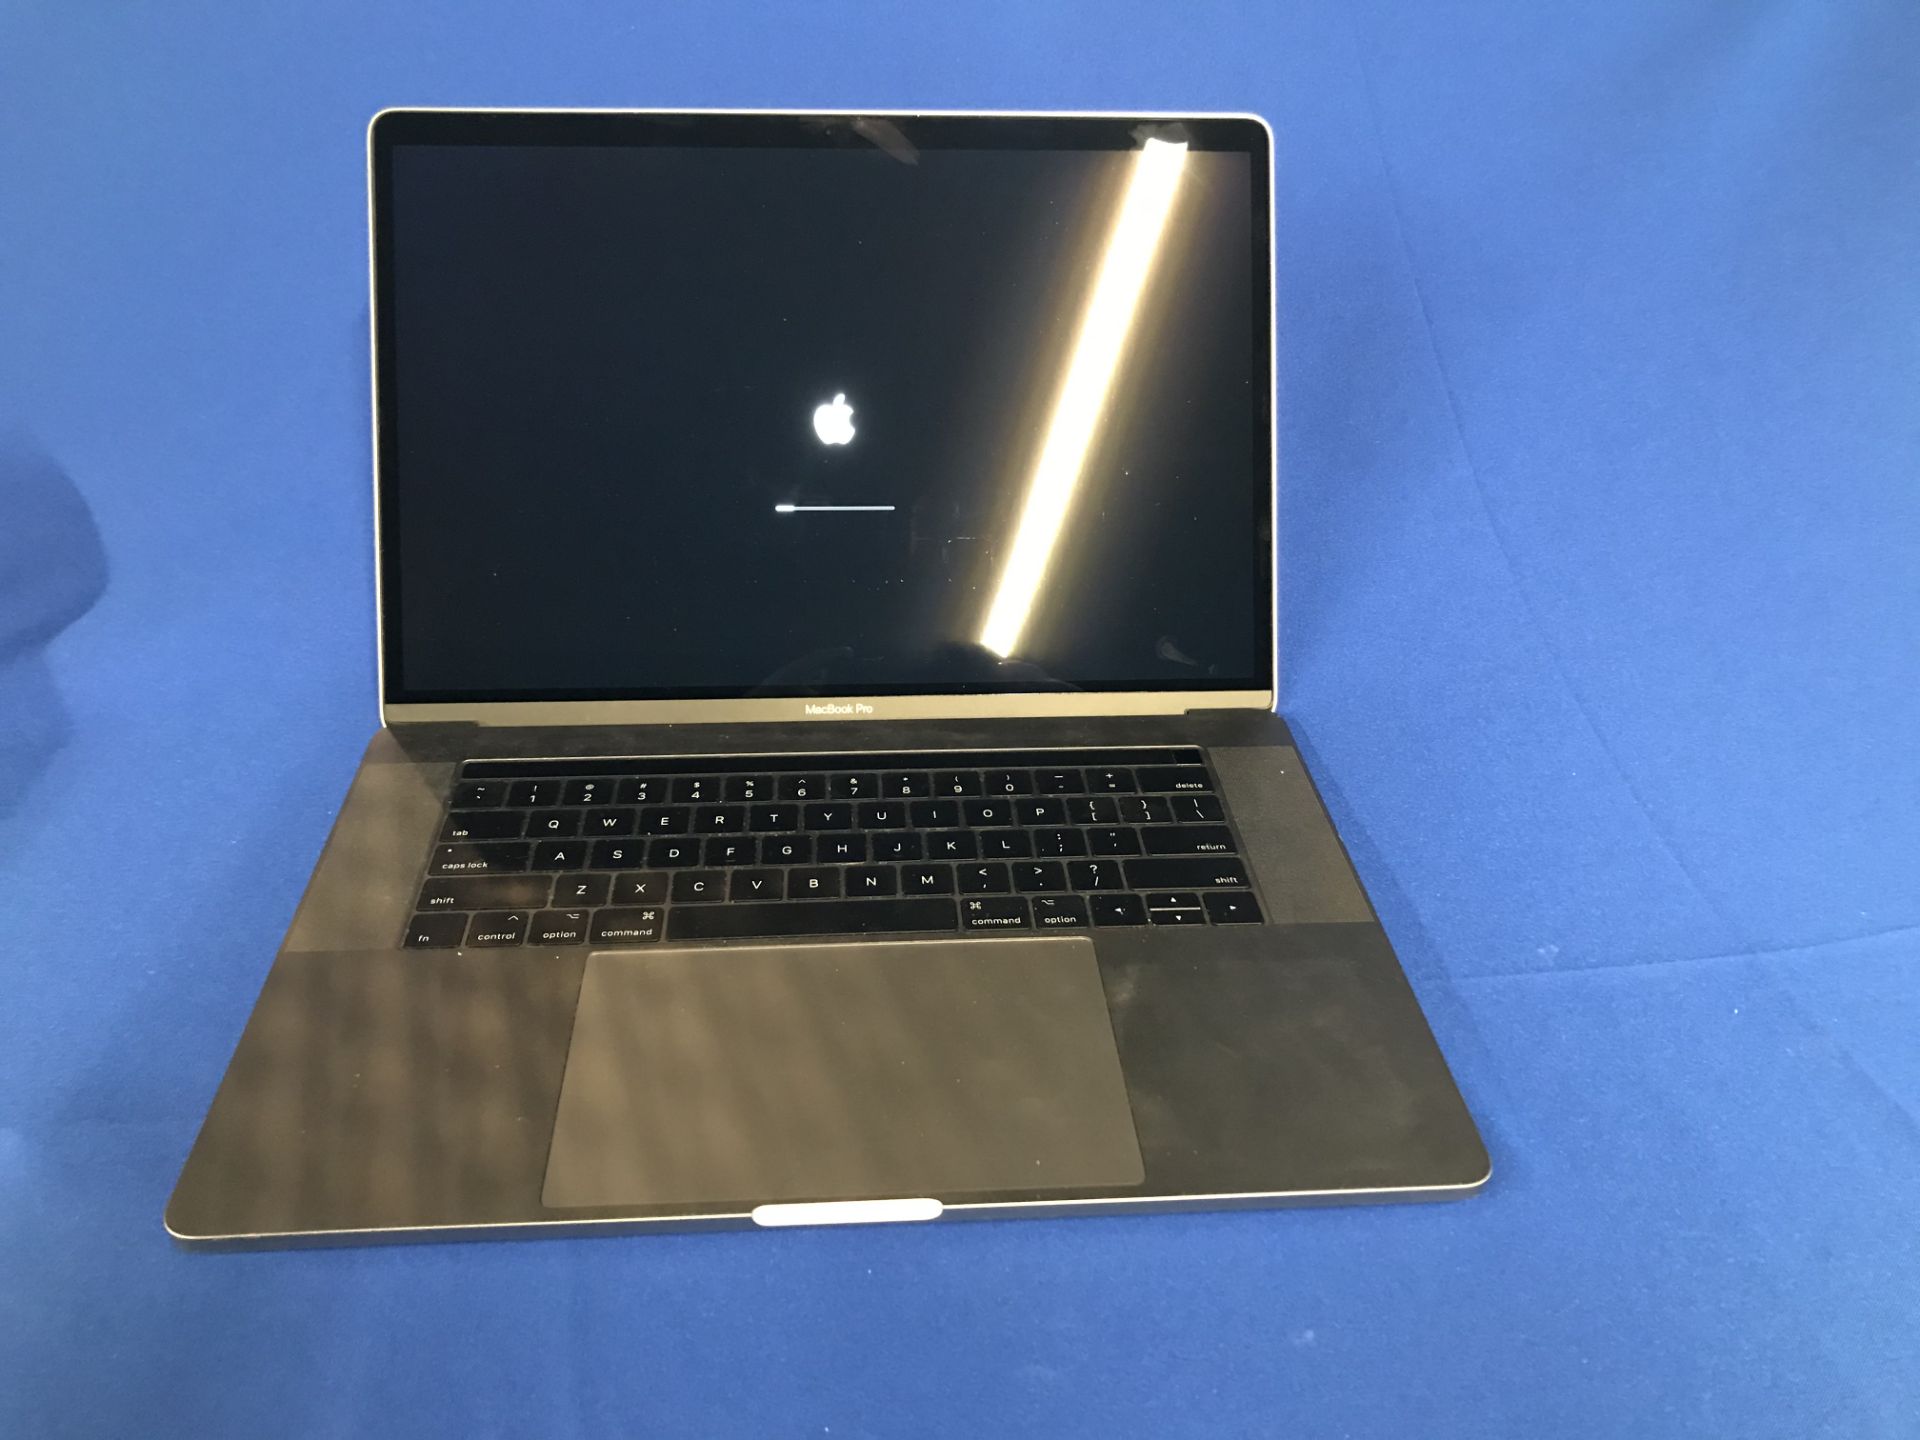 MacBook Pro 15" w/ Touch Bar 2.9,GHz Quad-Cell Intel Core I7, Turbo Boost Up to 3.8GHz, 16 GB - Image 2 of 2